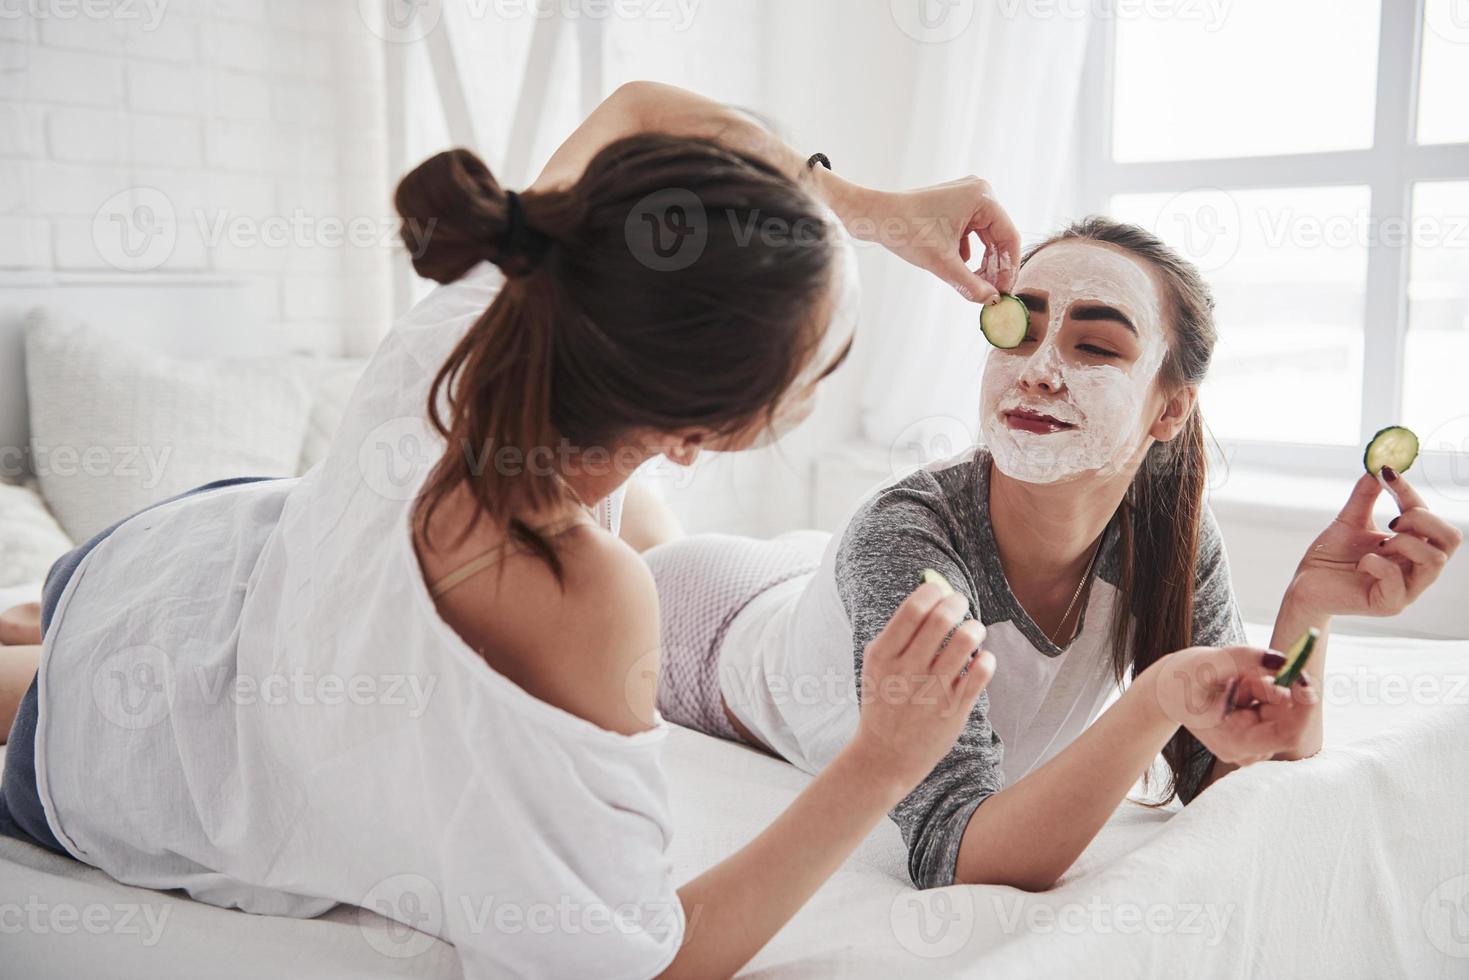 That's will look great on you. Conception of skin care by using white mask and cucumbers on the face. Two female sisters have weekend at bedroom photo